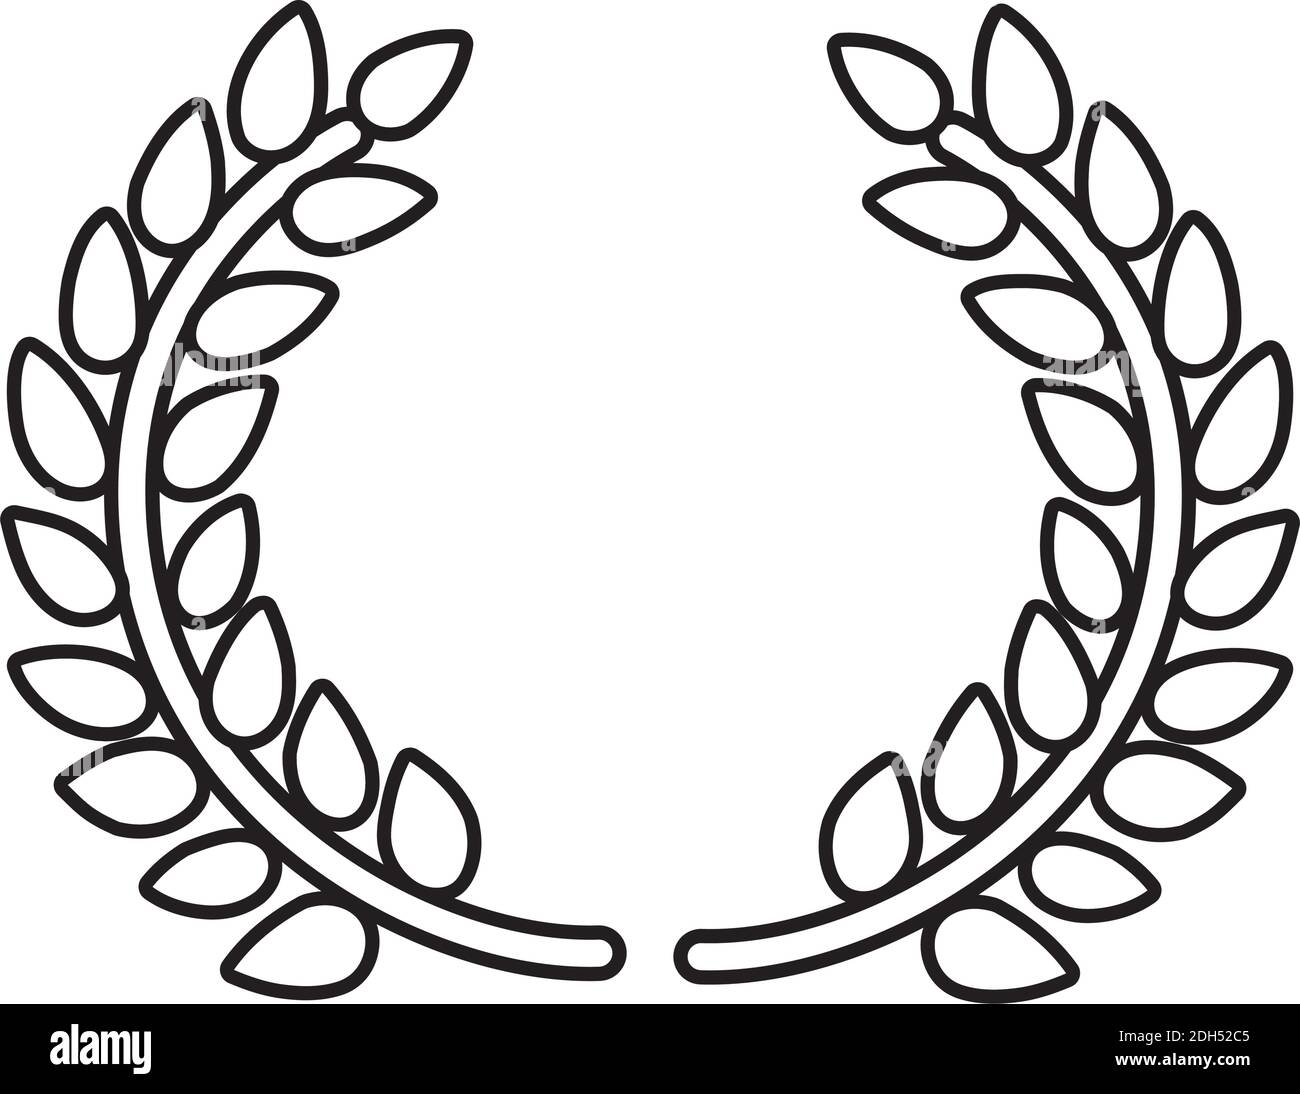 wreath leafs crown line style icon vector illustration design Stock Vector